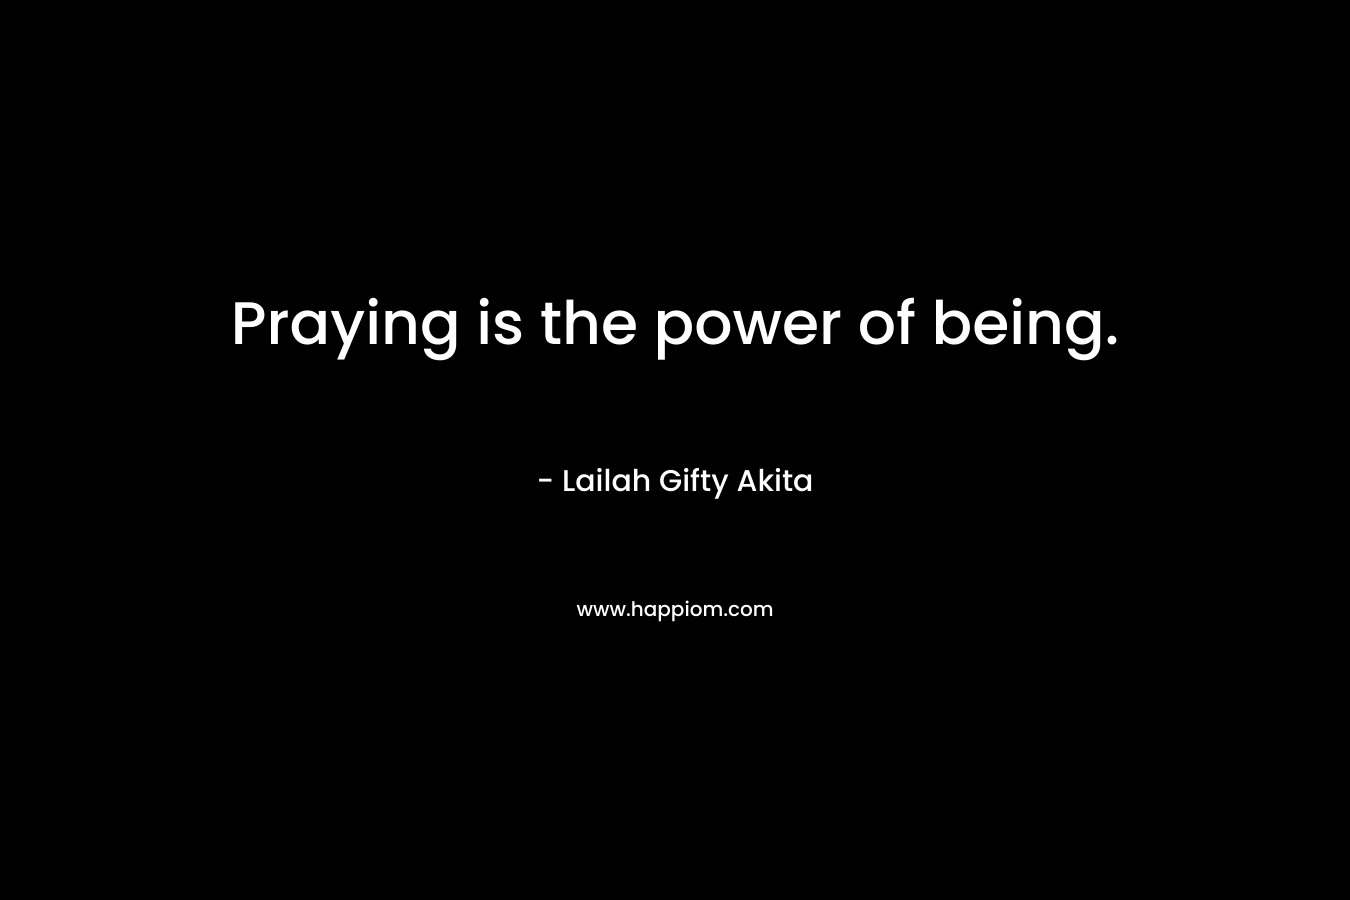 Praying is the power of being.